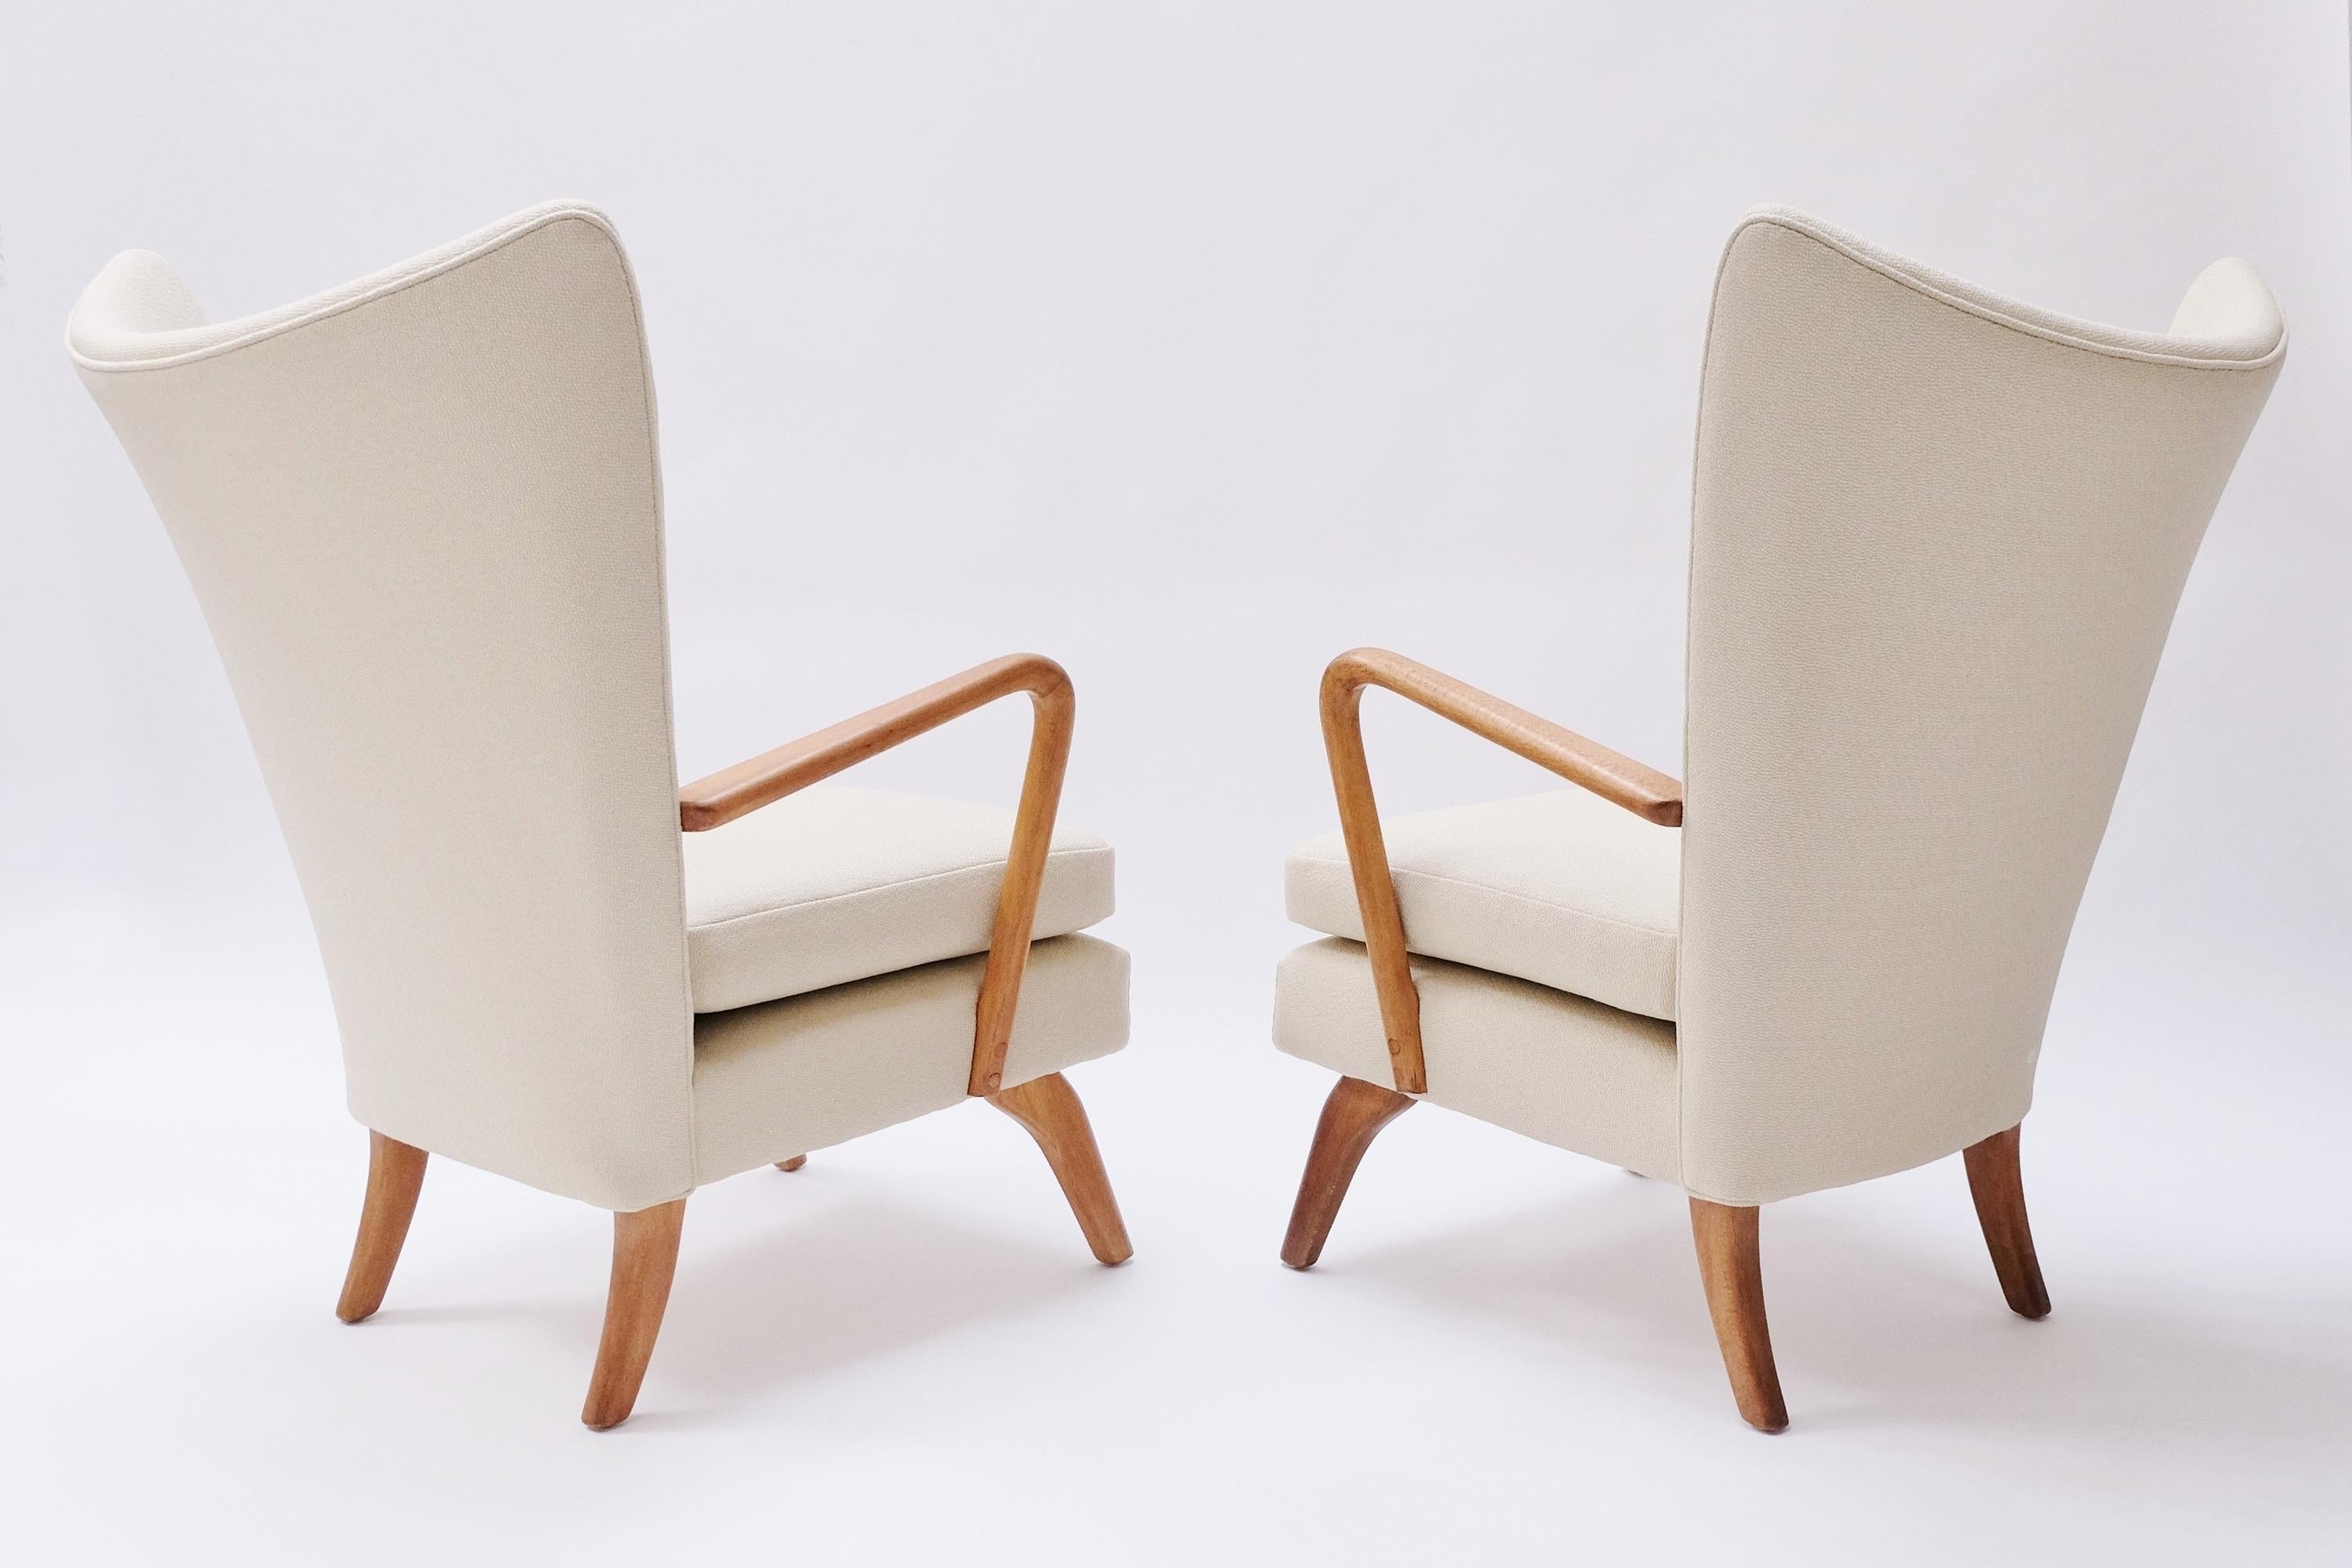 A pair of highly collectible midcentury Bambino wingback armchairs designed by Howard Keith for HK furniture. England, circa mid-1950s.

These stunning armchairs feature a beautifully curved winged back with tufted button detail and honey-colored